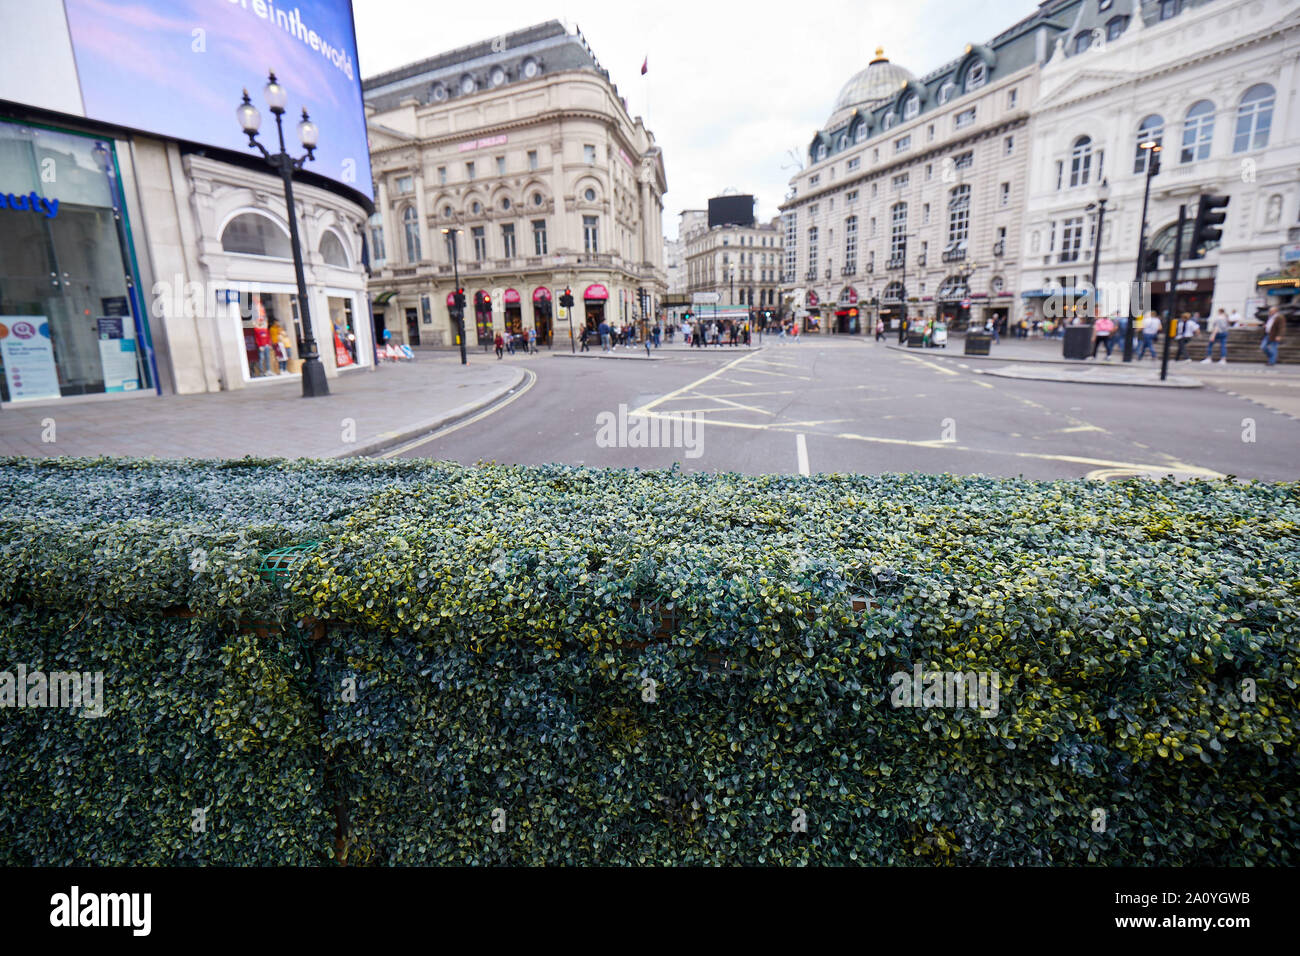 London, U.K. - Sept 22, 2019: An artifical hedge placed along Regent Street as part of activties across the capital to mark London car-free day. Stock Photo